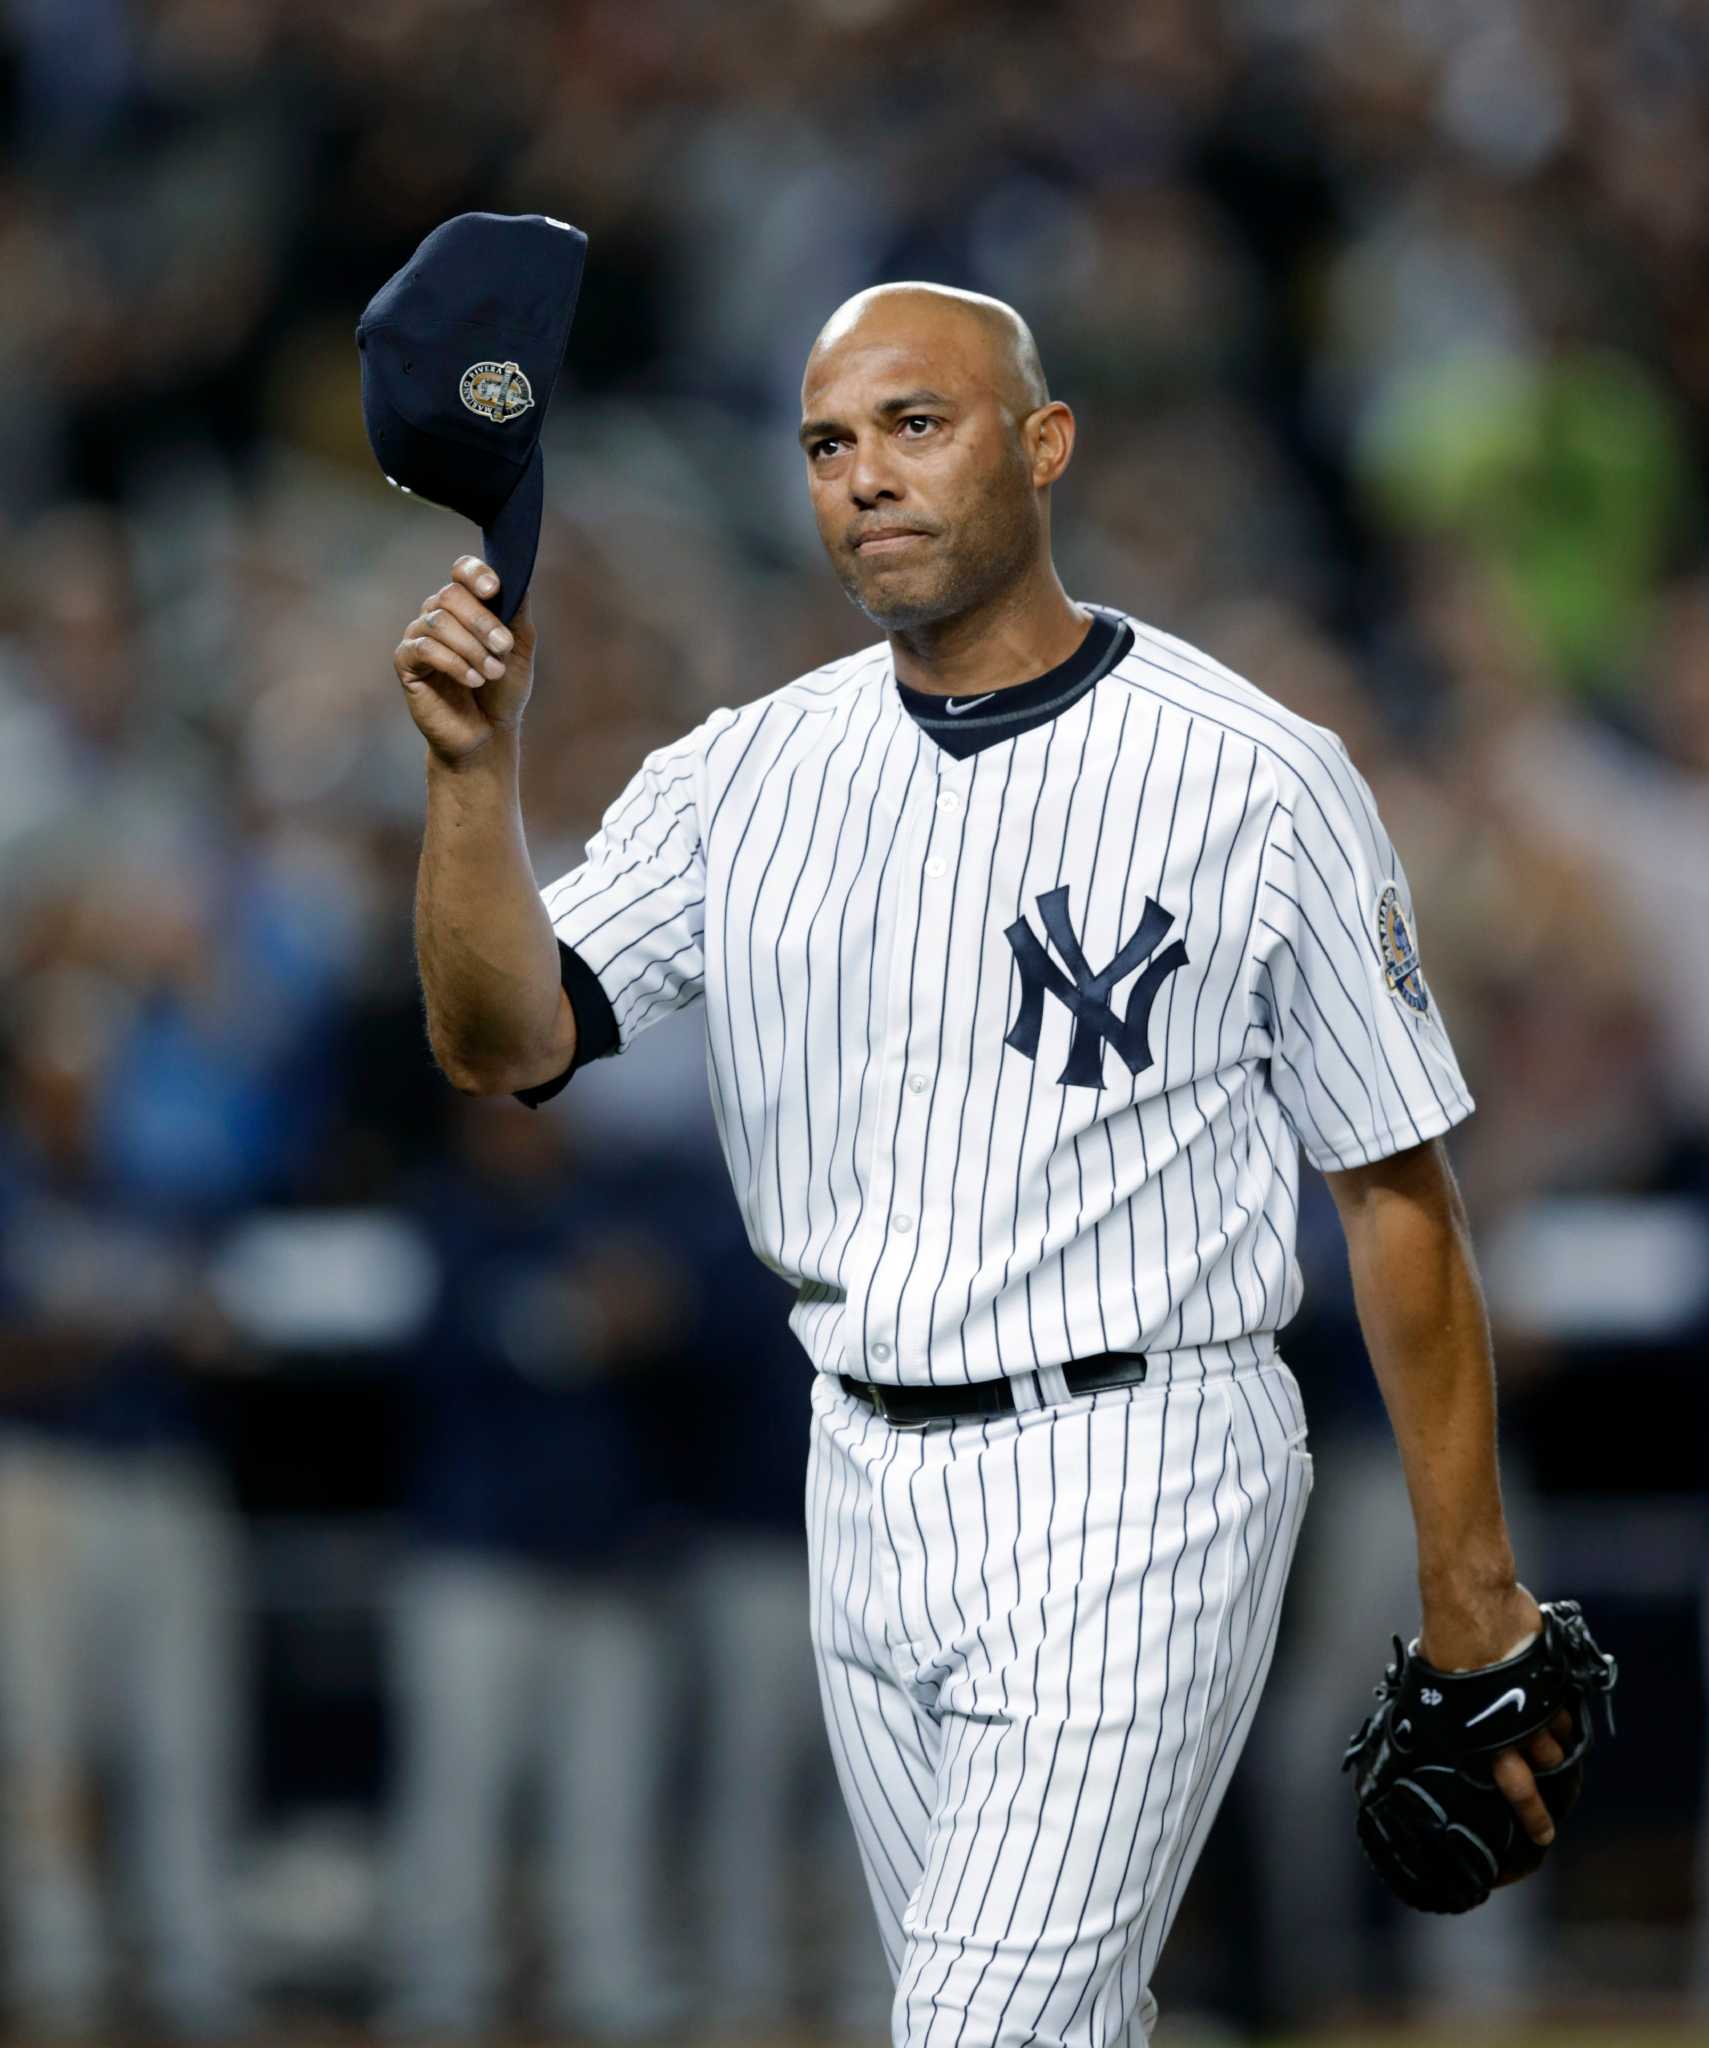 NY YANKEES MARIANO RIVERA DELIVERS HIS FAMOUS CUTTER AT THE STADIUM CLASSIC